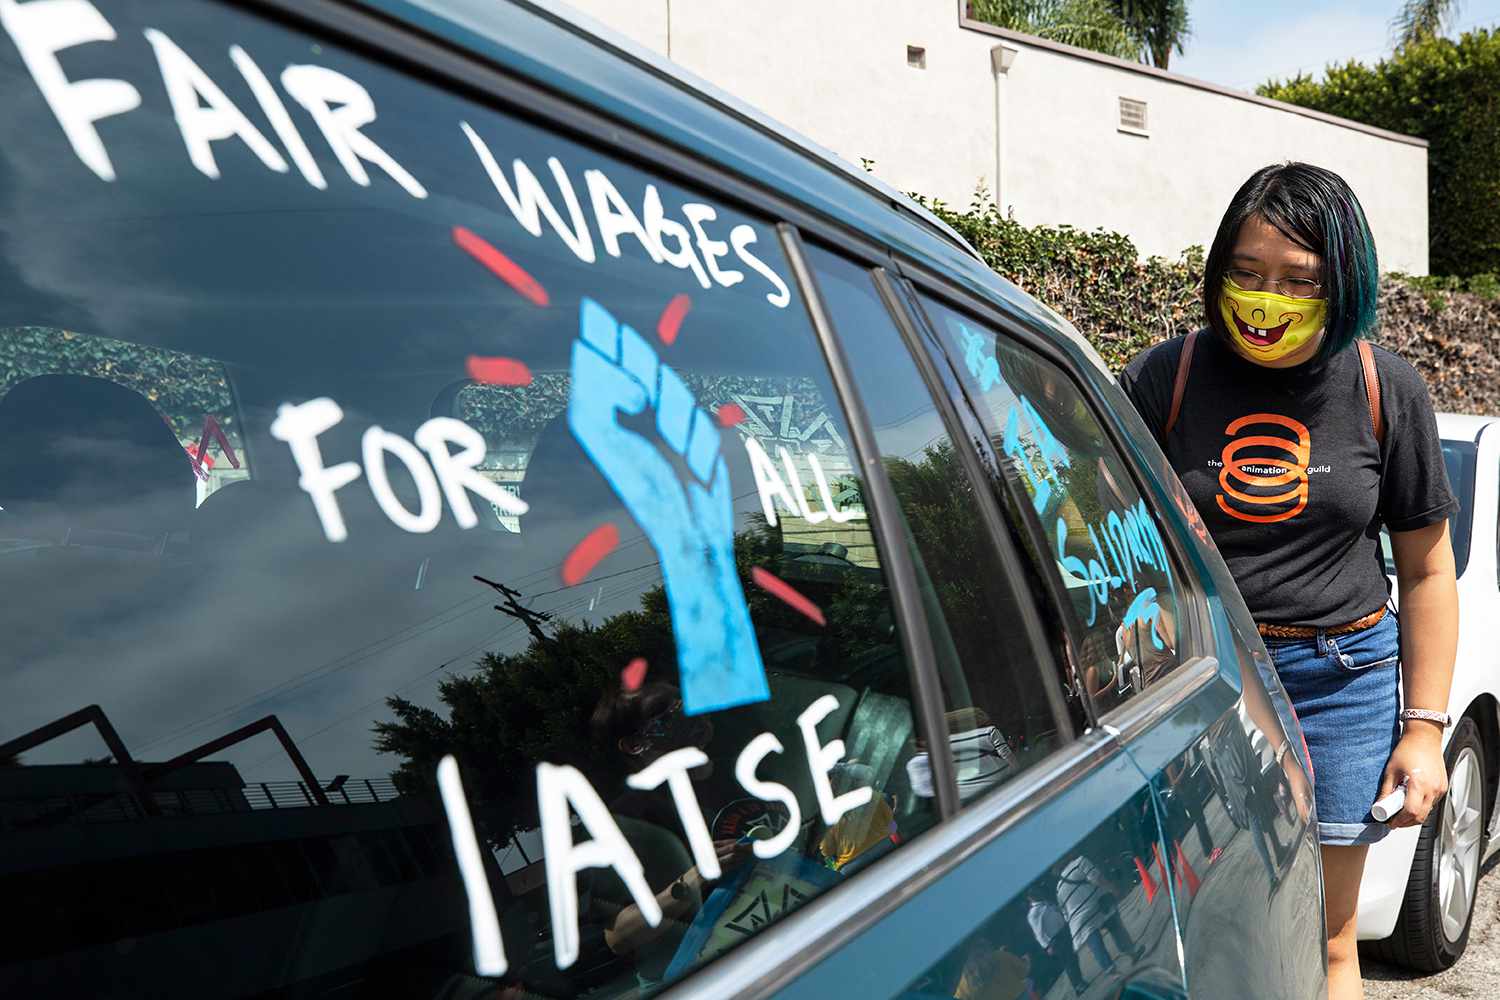 Crystal Kan, a storyboard artist, draws pro-labor signs on cars of union members during a rally at the Motion Picture Editors Guild IATSE Local 700 on Sunday, Sept. 26, 2021 in Los Angeles, CA. Up to 60,000 members of the International Alliance of Theatrical Stage Employees (IATSE) might go on strike in the coming weeks over issues of long working hours, unsafe conditions, less pay from streaming companies and demand for better benefits.